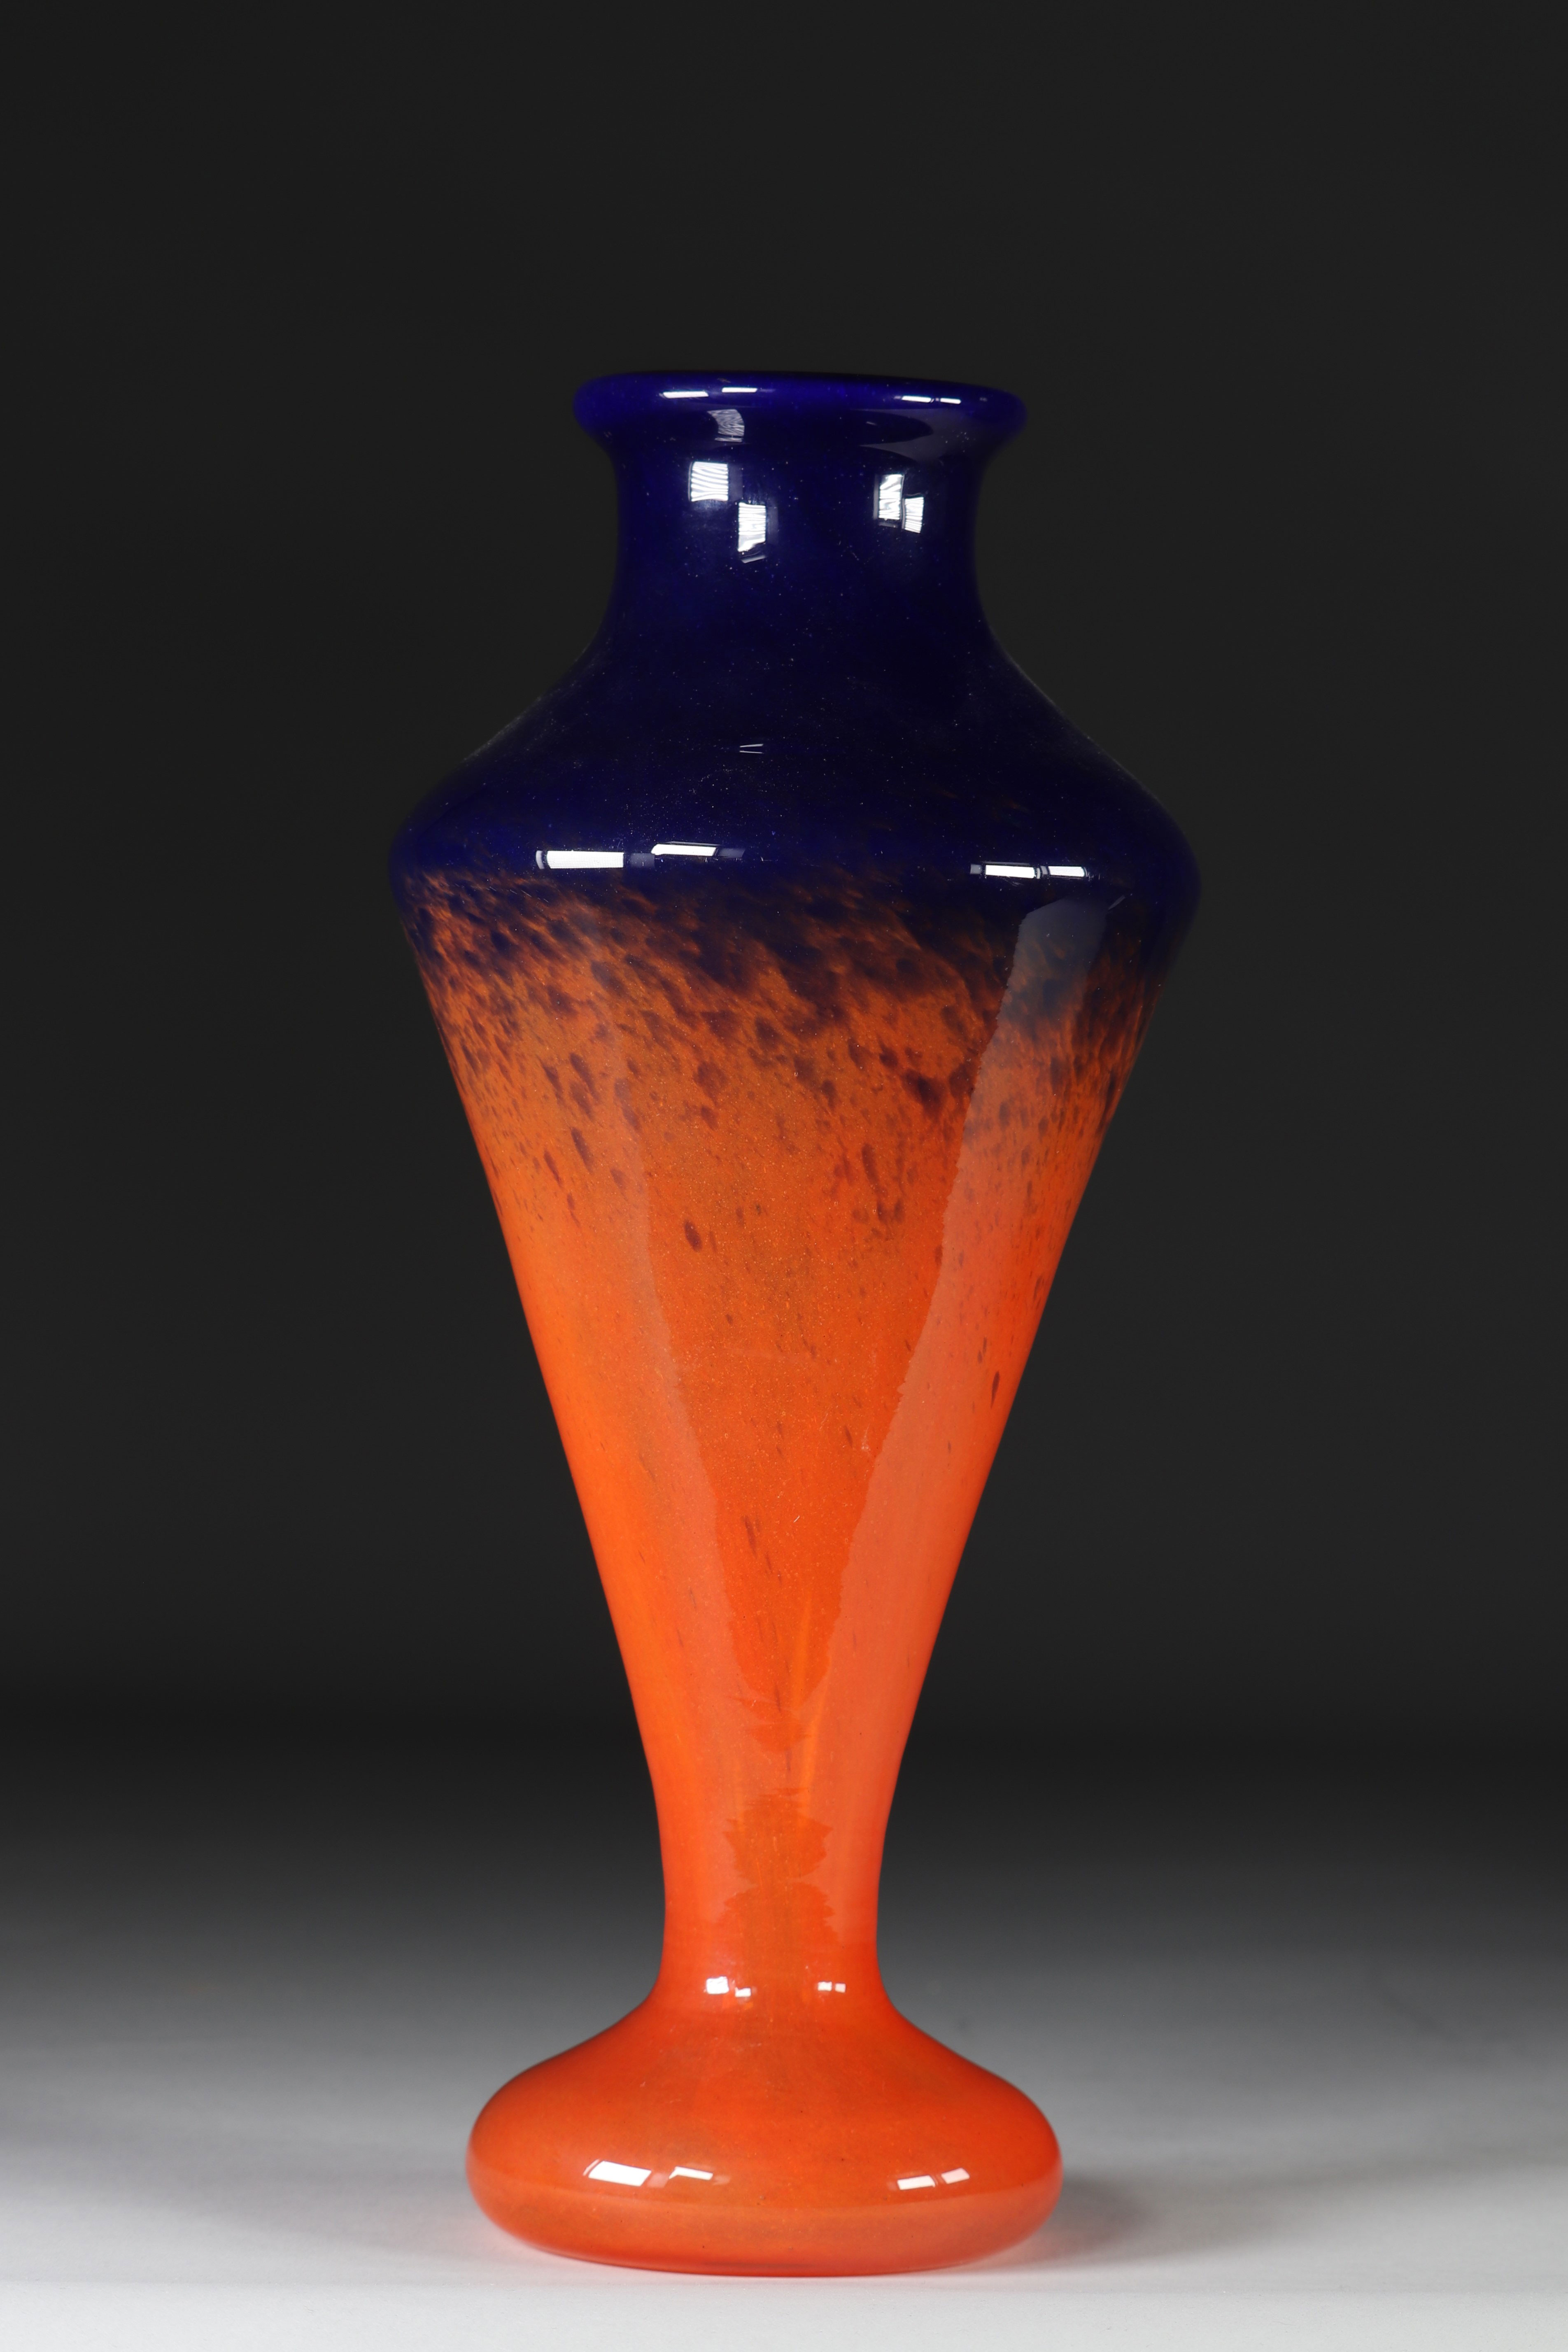 Schneider glass vase with shower foot in orange and blue shades - Image 2 of 2